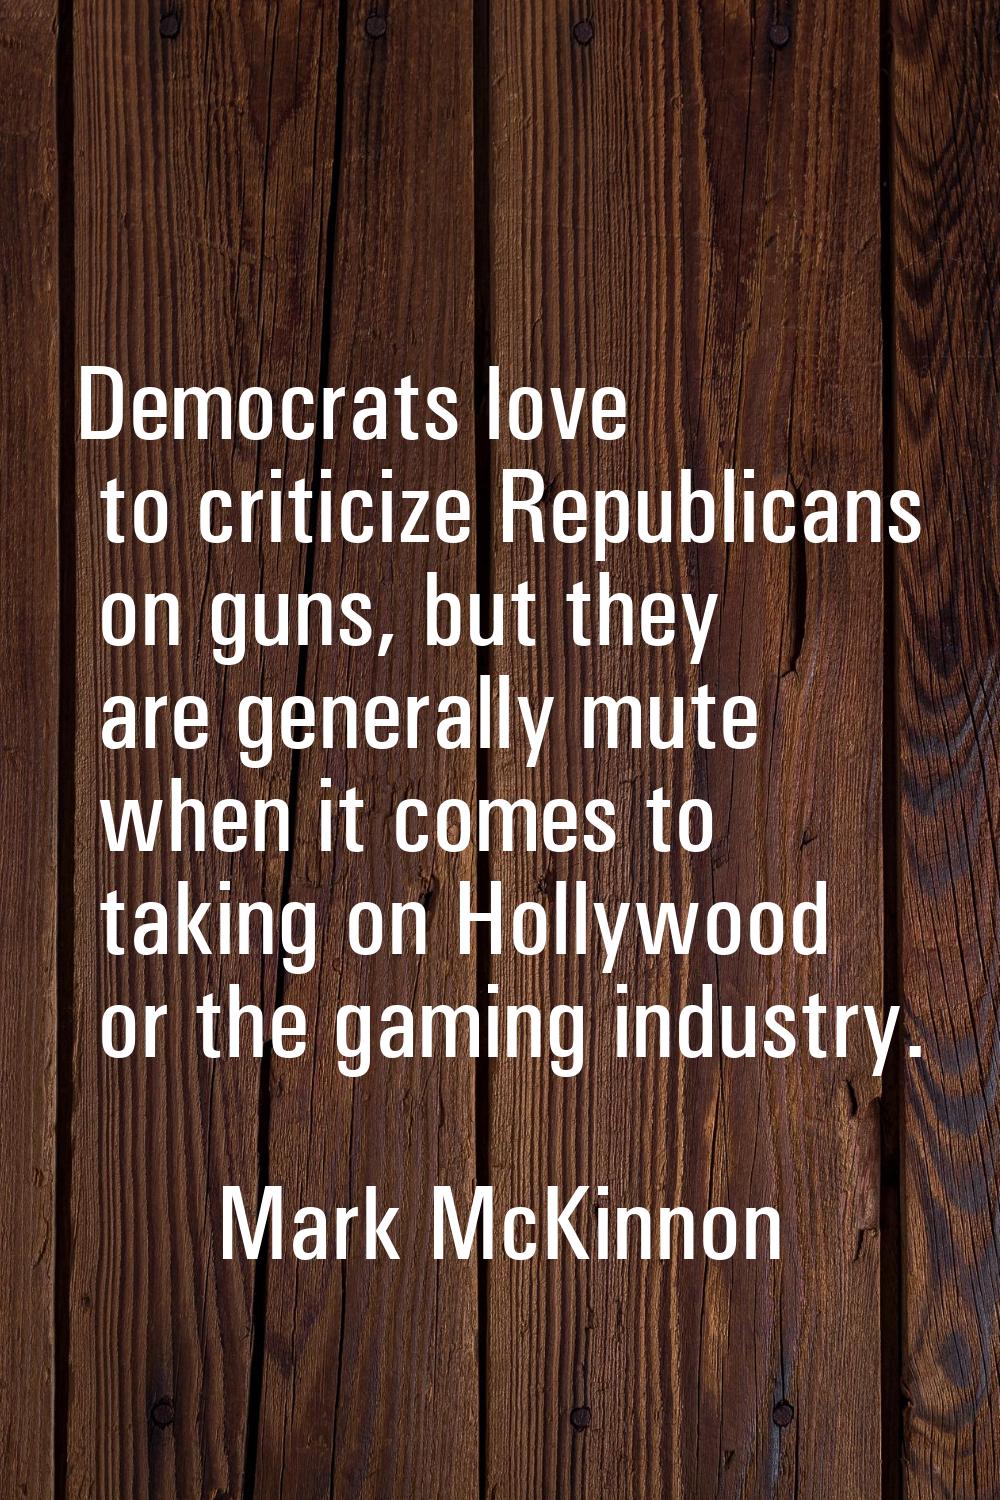 Democrats love to criticize Republicans on guns, but they are generally mute when it comes to takin